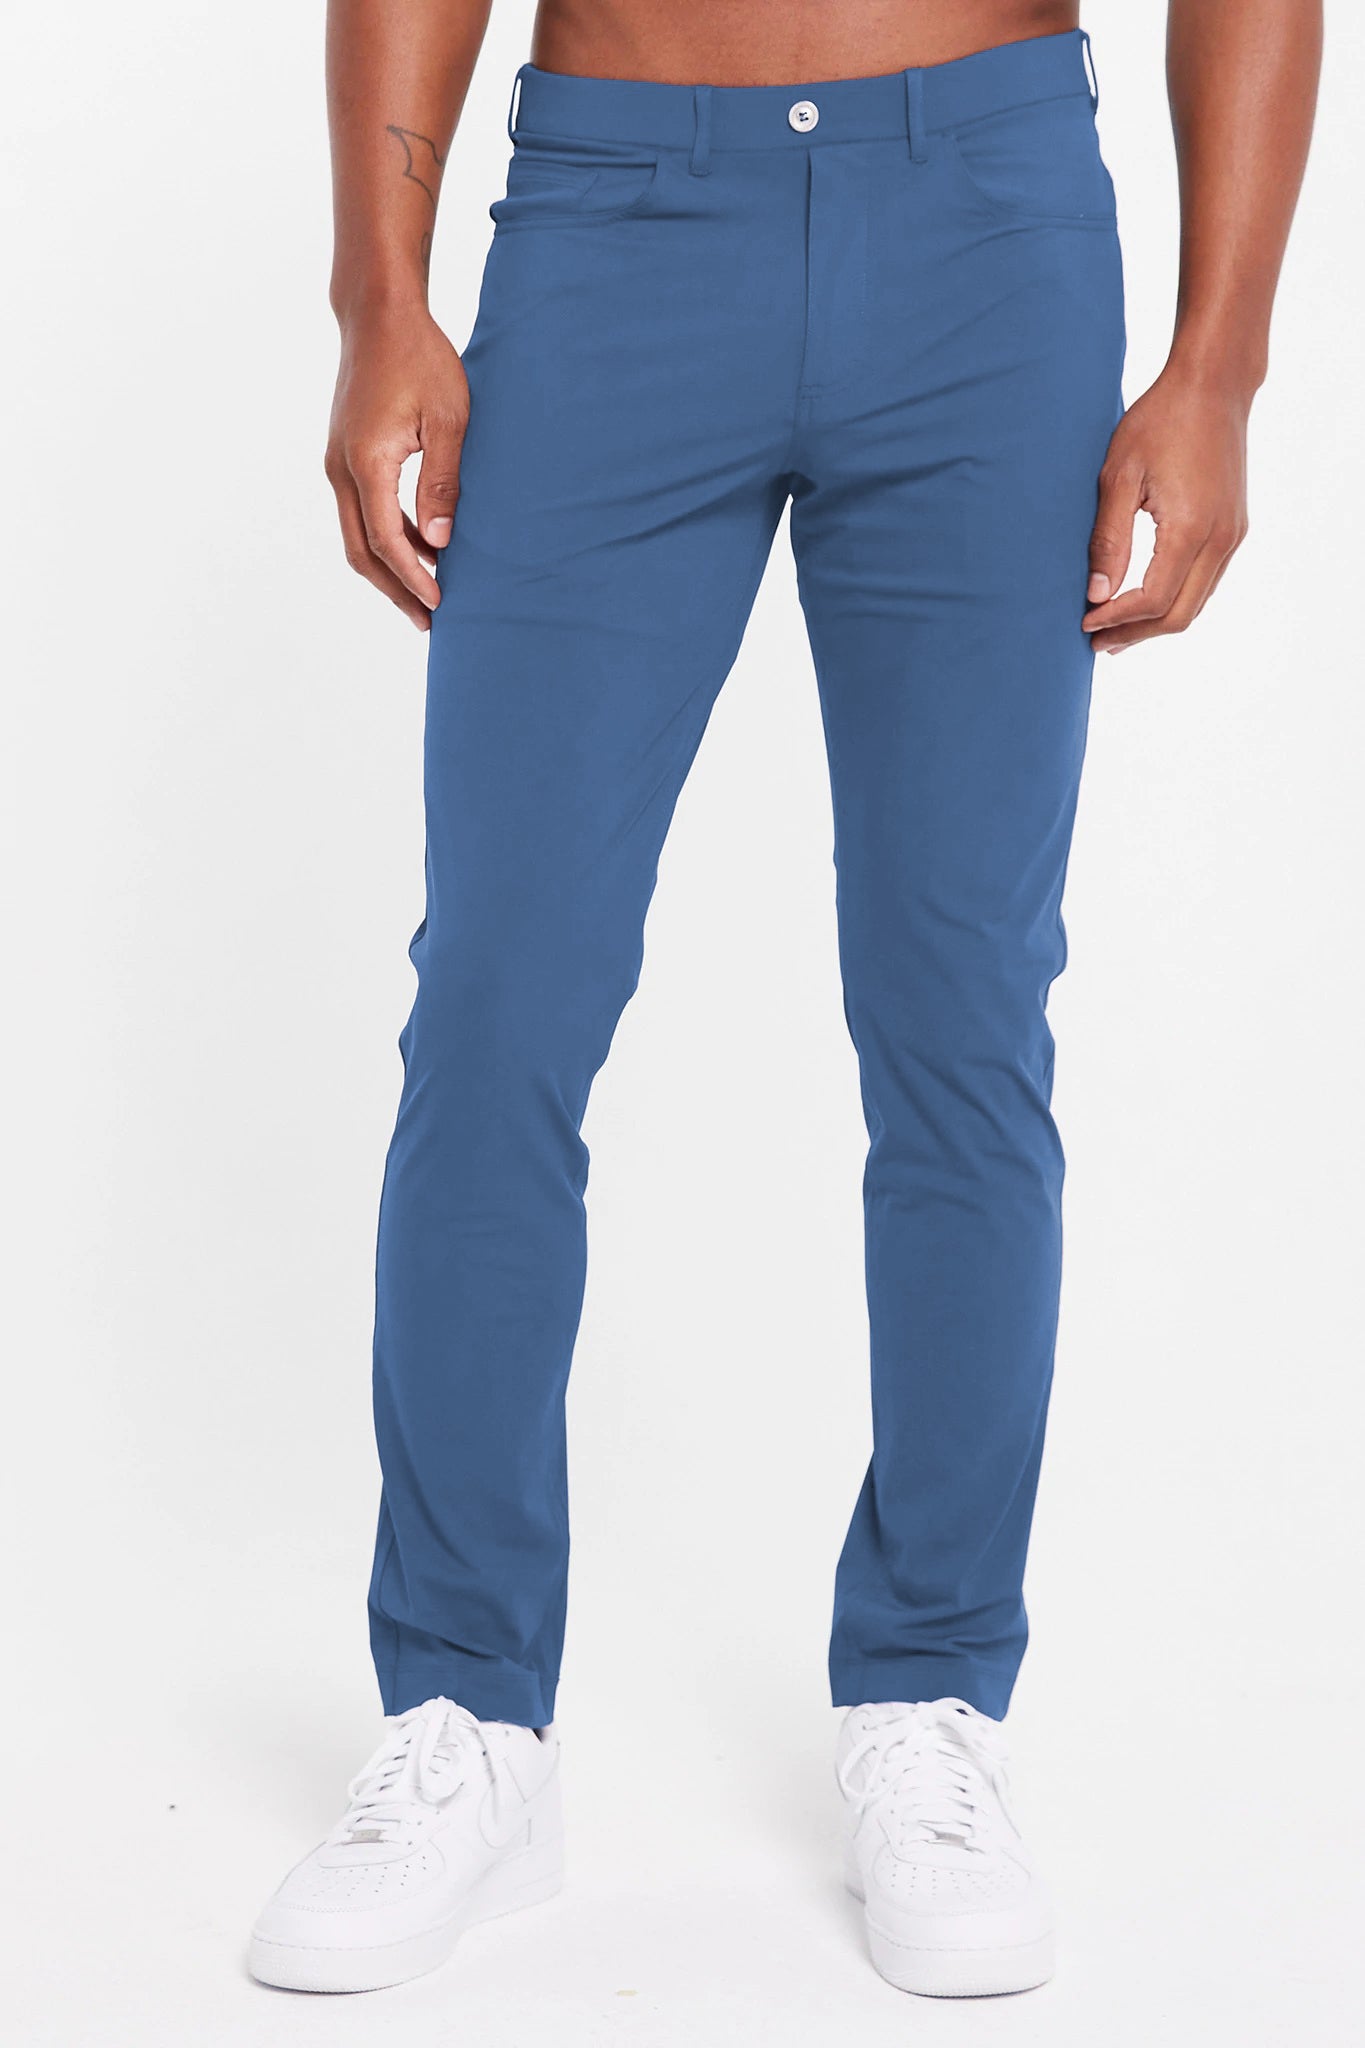 Image of the kent pull-on trouser in indigo